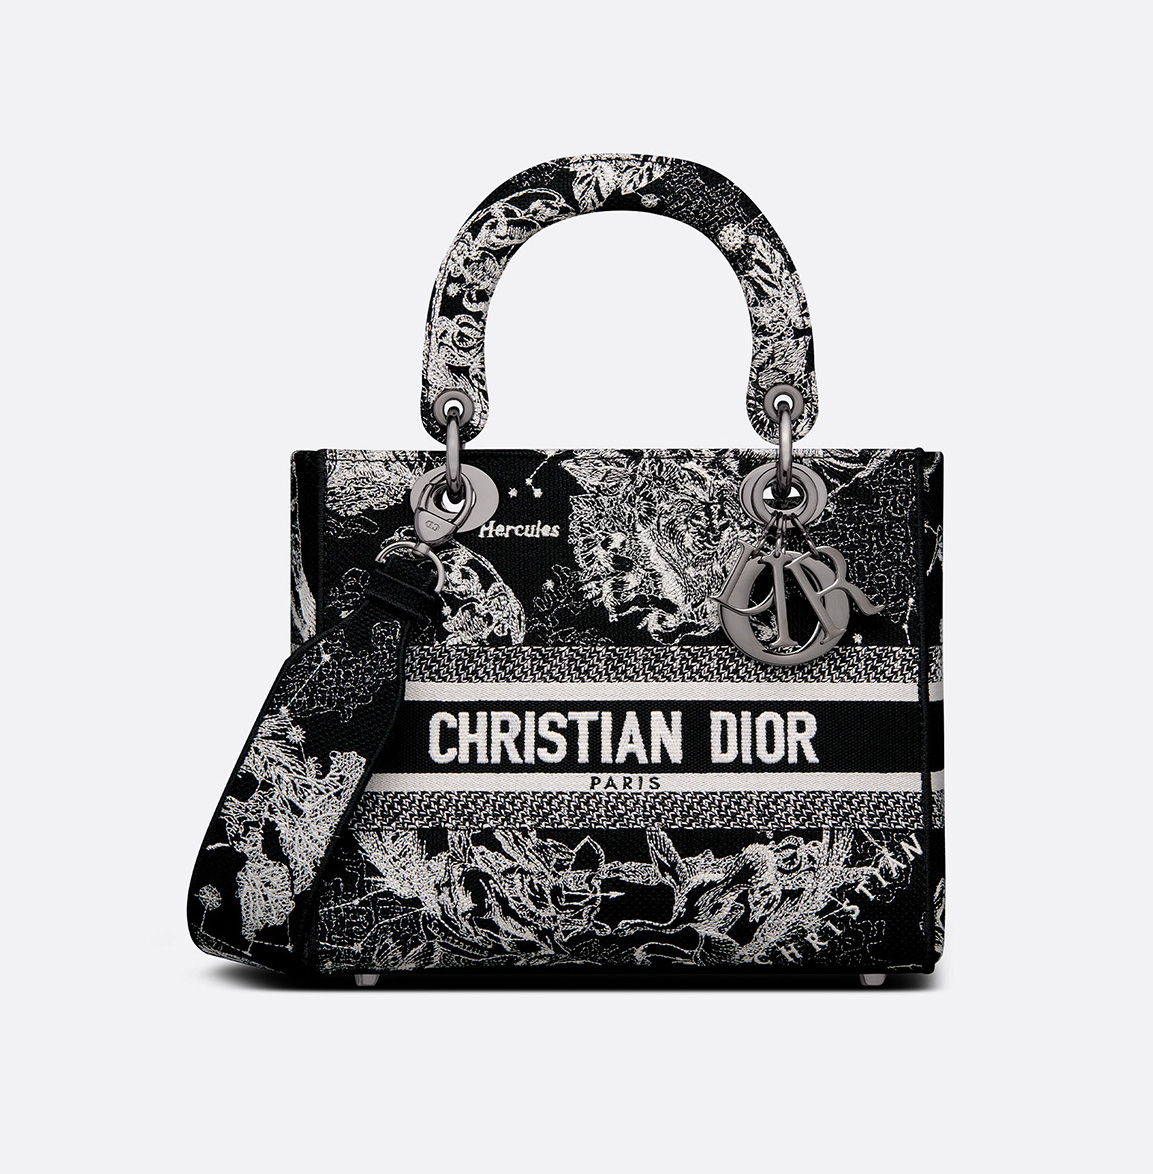 Christian Dior Used Bags Norway, SAVE 35% - jfmb.eu